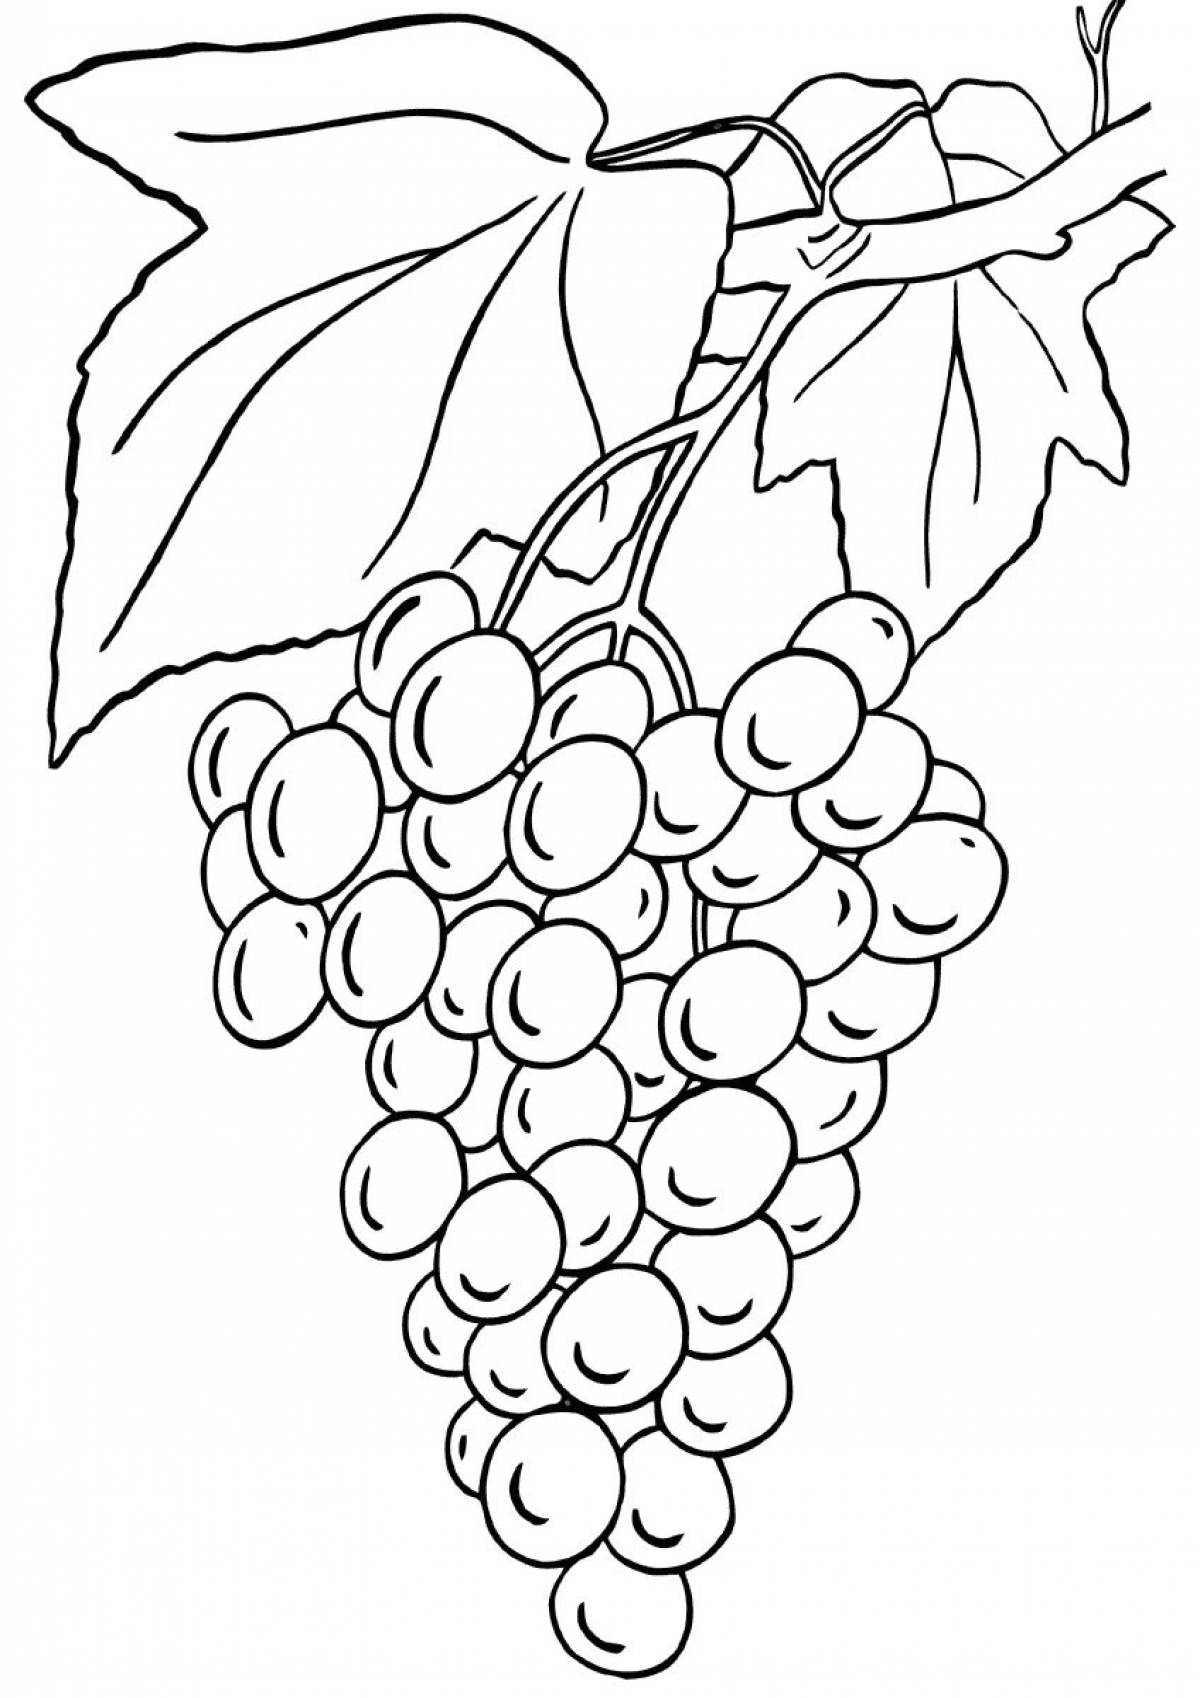 Magic grapes coloring book for children 5-6 years old